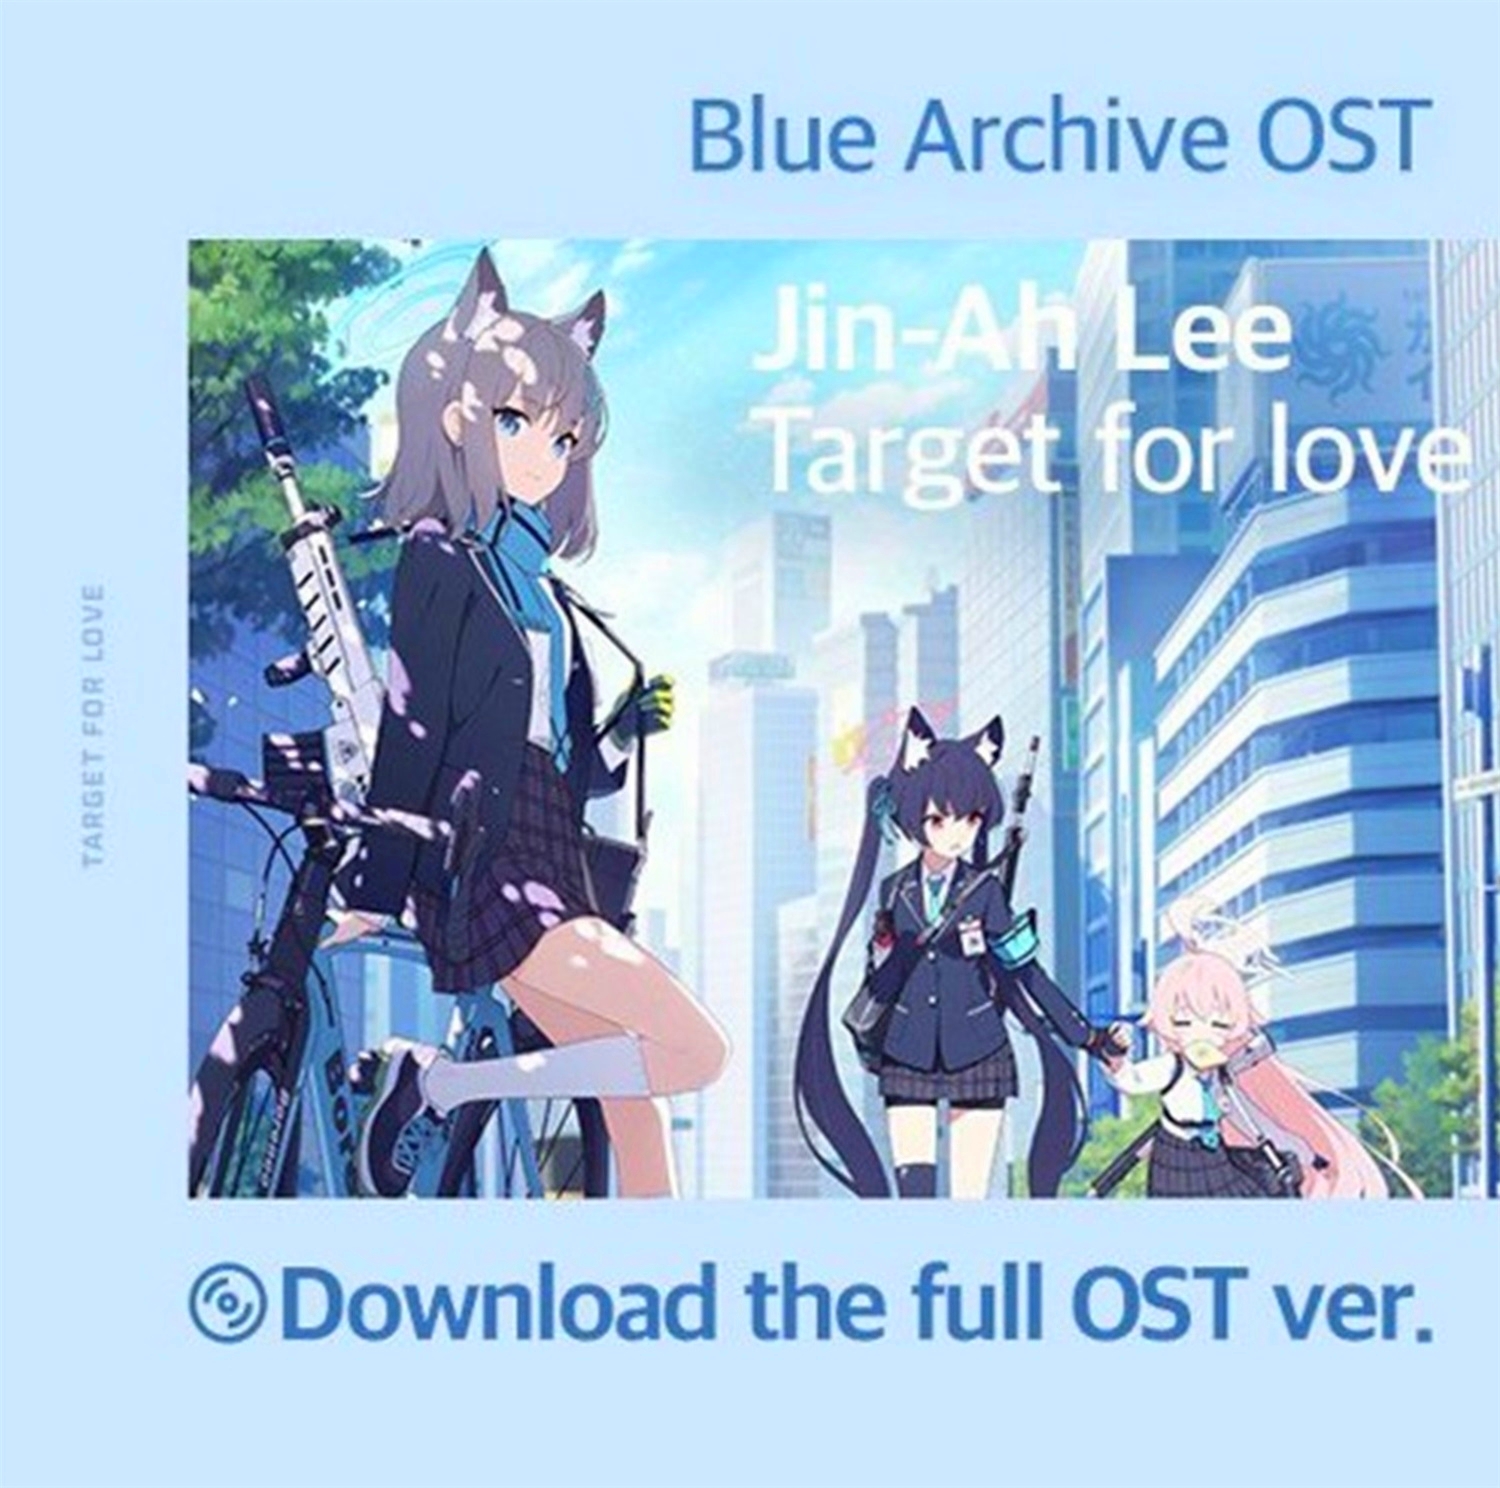 【MP3】ゲーム「ブルーアーカイブ -Blue Archive-」Theme Song「Target for love」／이진아